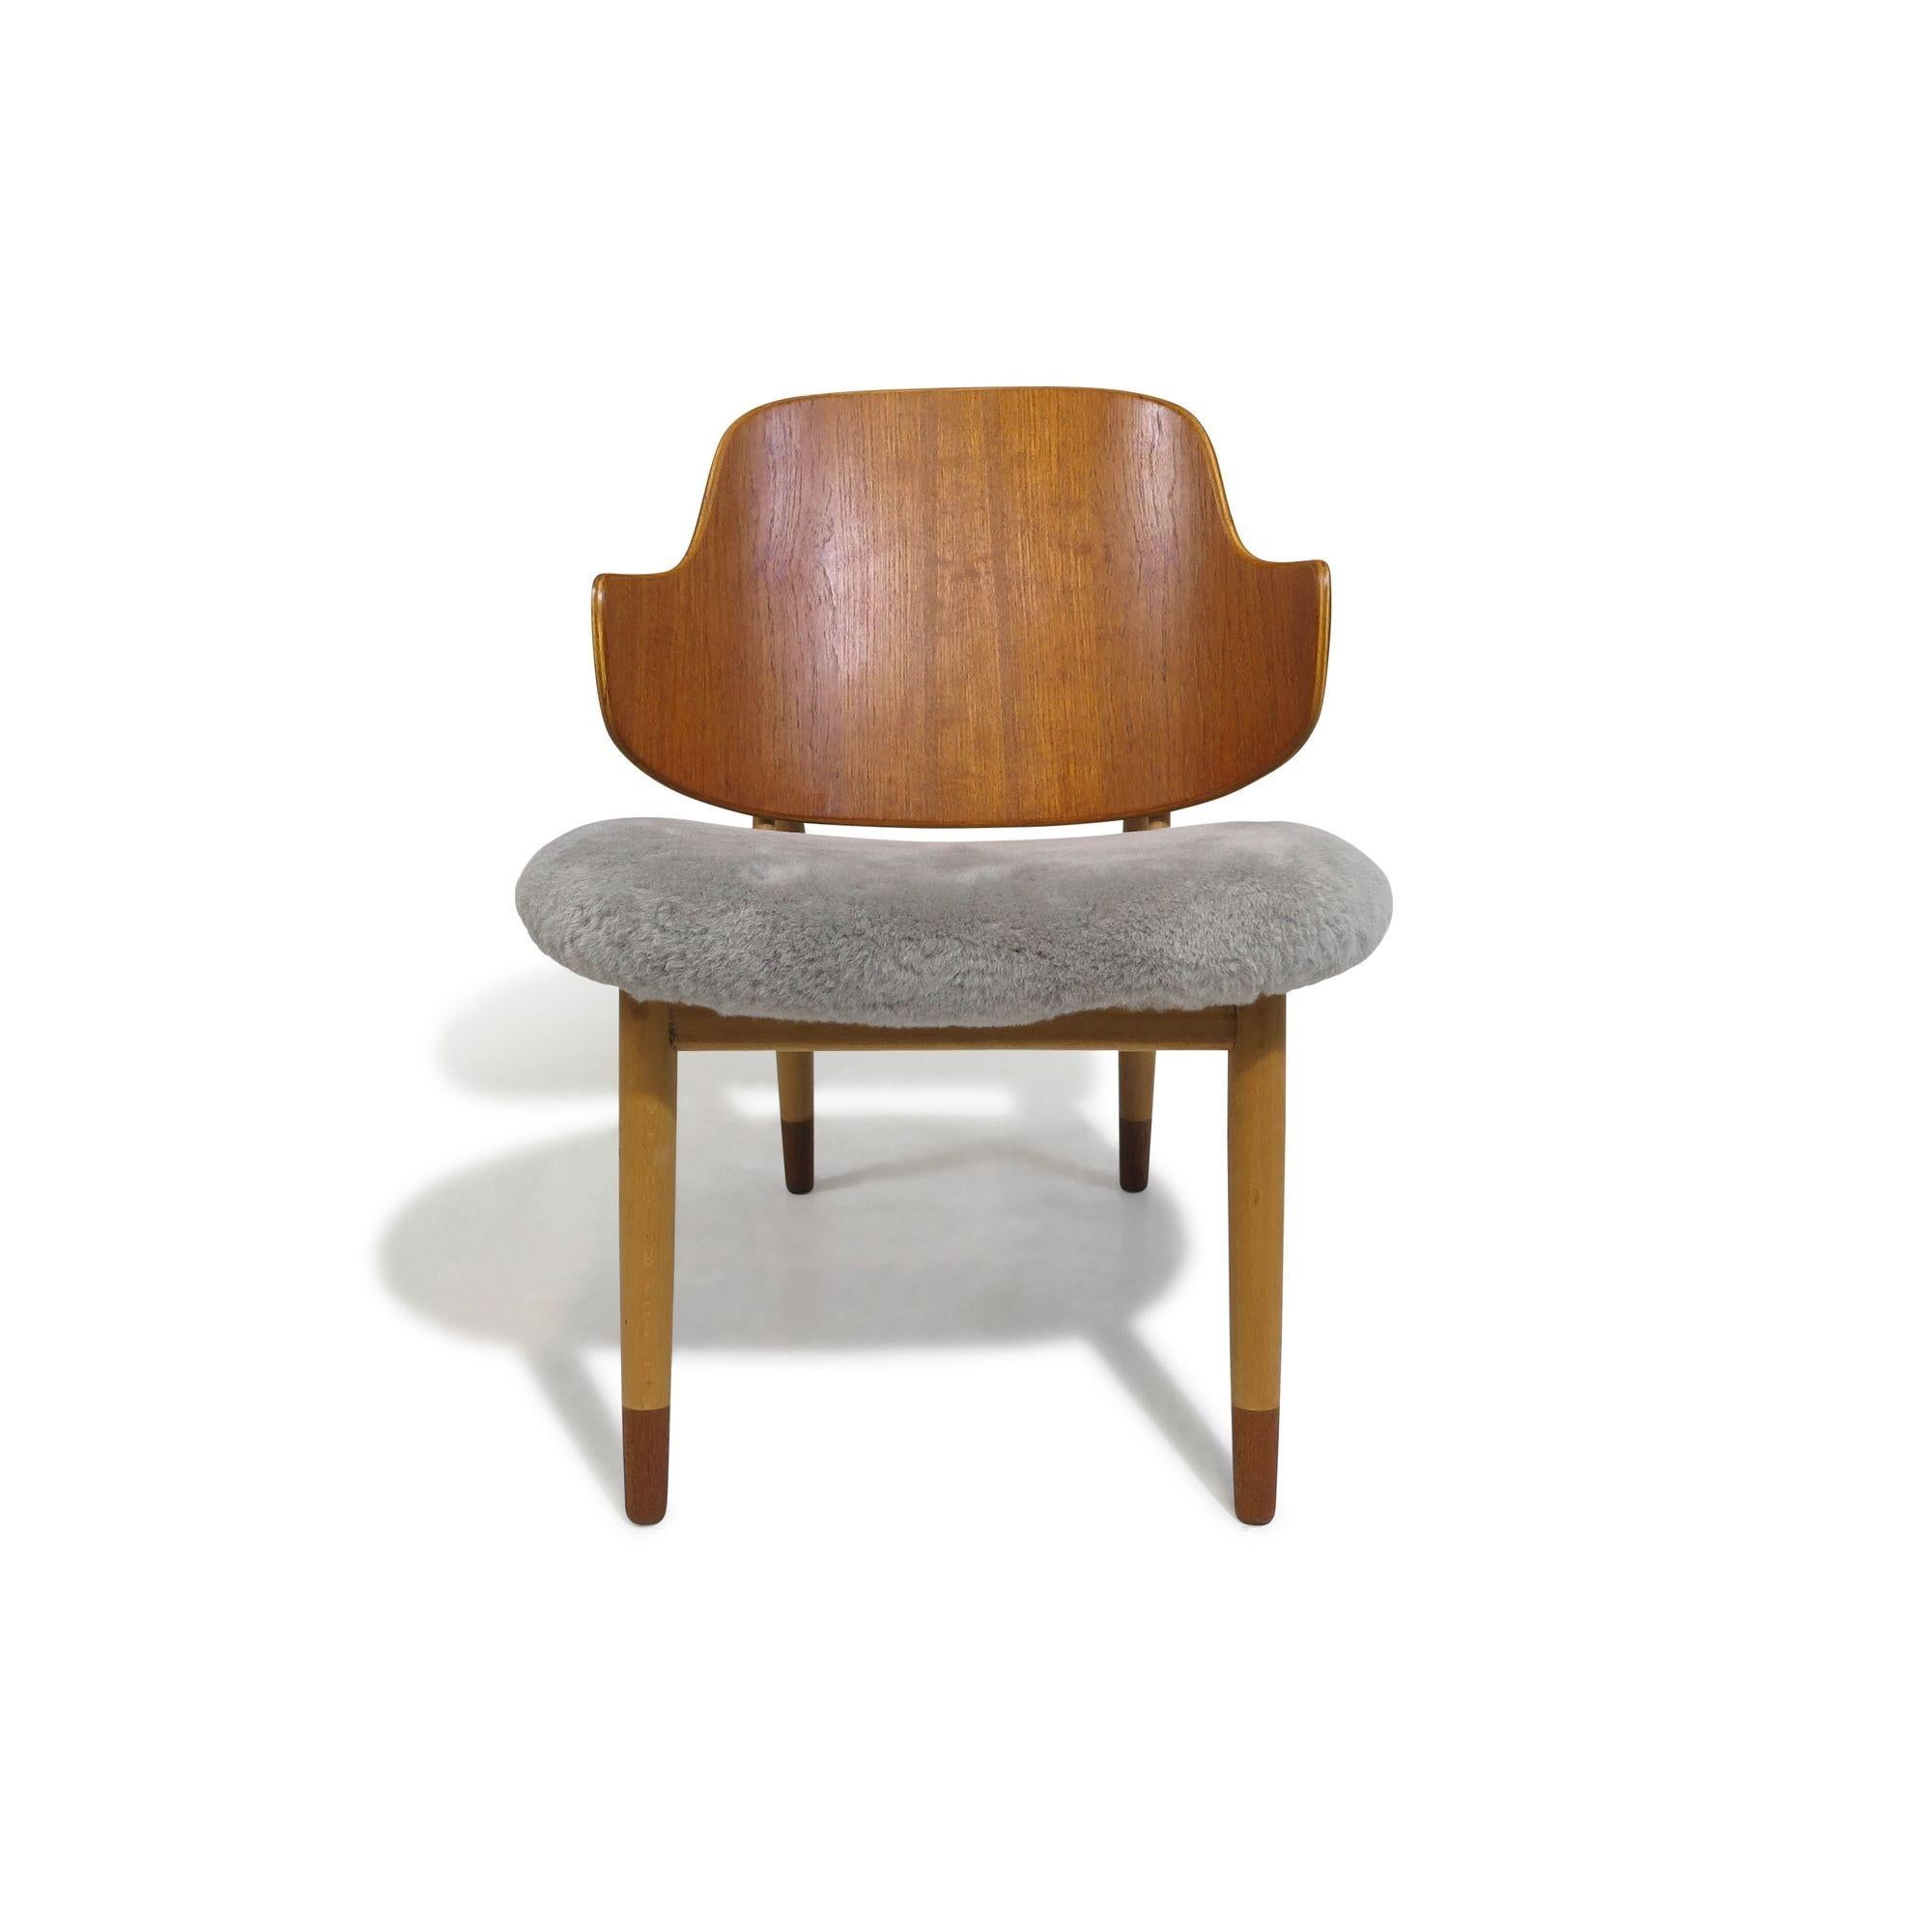 Danish lounge chair designed by Ib Kofod Larsen crafted of a beech frame with curved teak backrest, upholstered seat in sheepskin.
Measurements
W 21.75’’ x D 24.75’’ x H 29.50’’
Seat Height 17